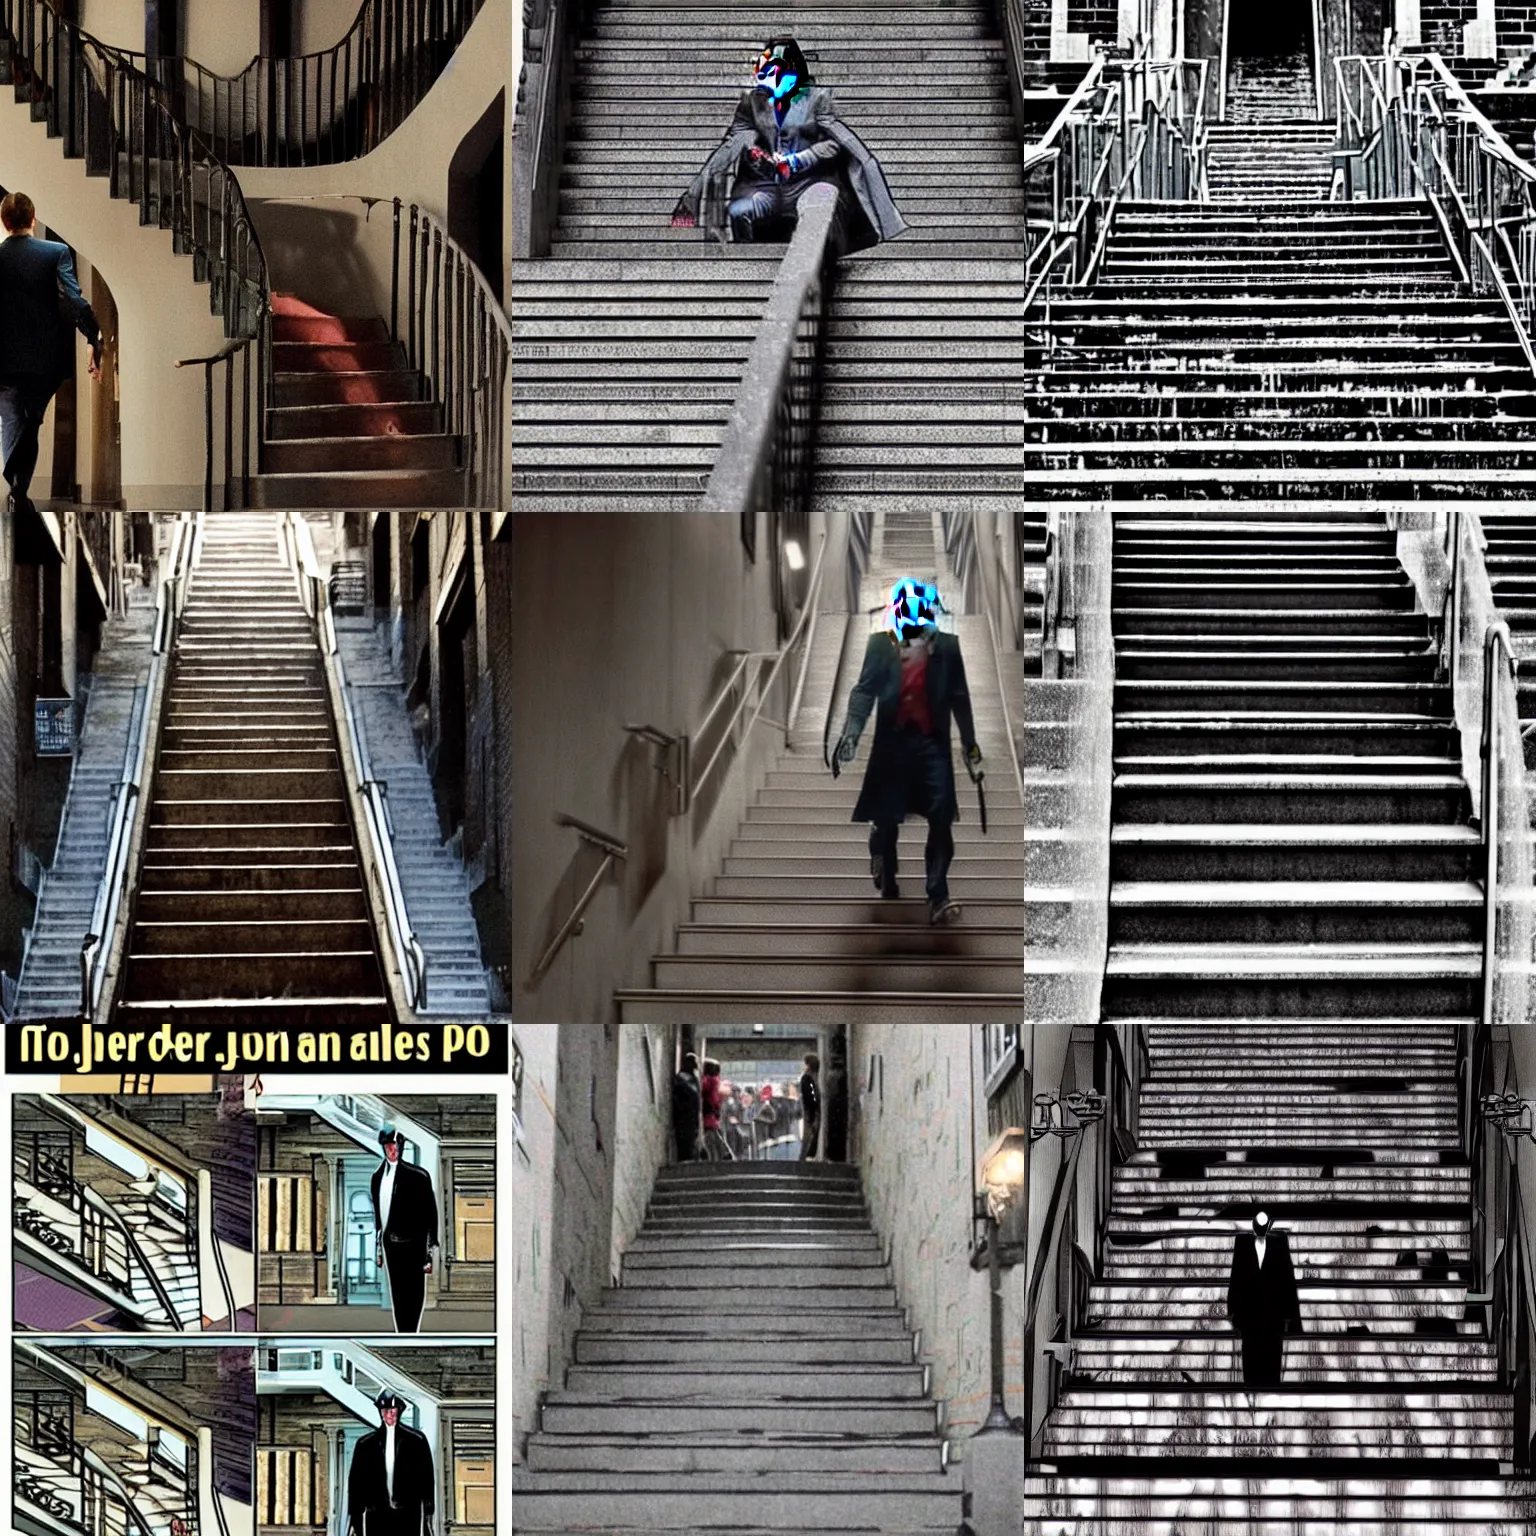 joker stairs meme, from joker ( 2 0 1 9 ) by todd | Stable Diffusion ...